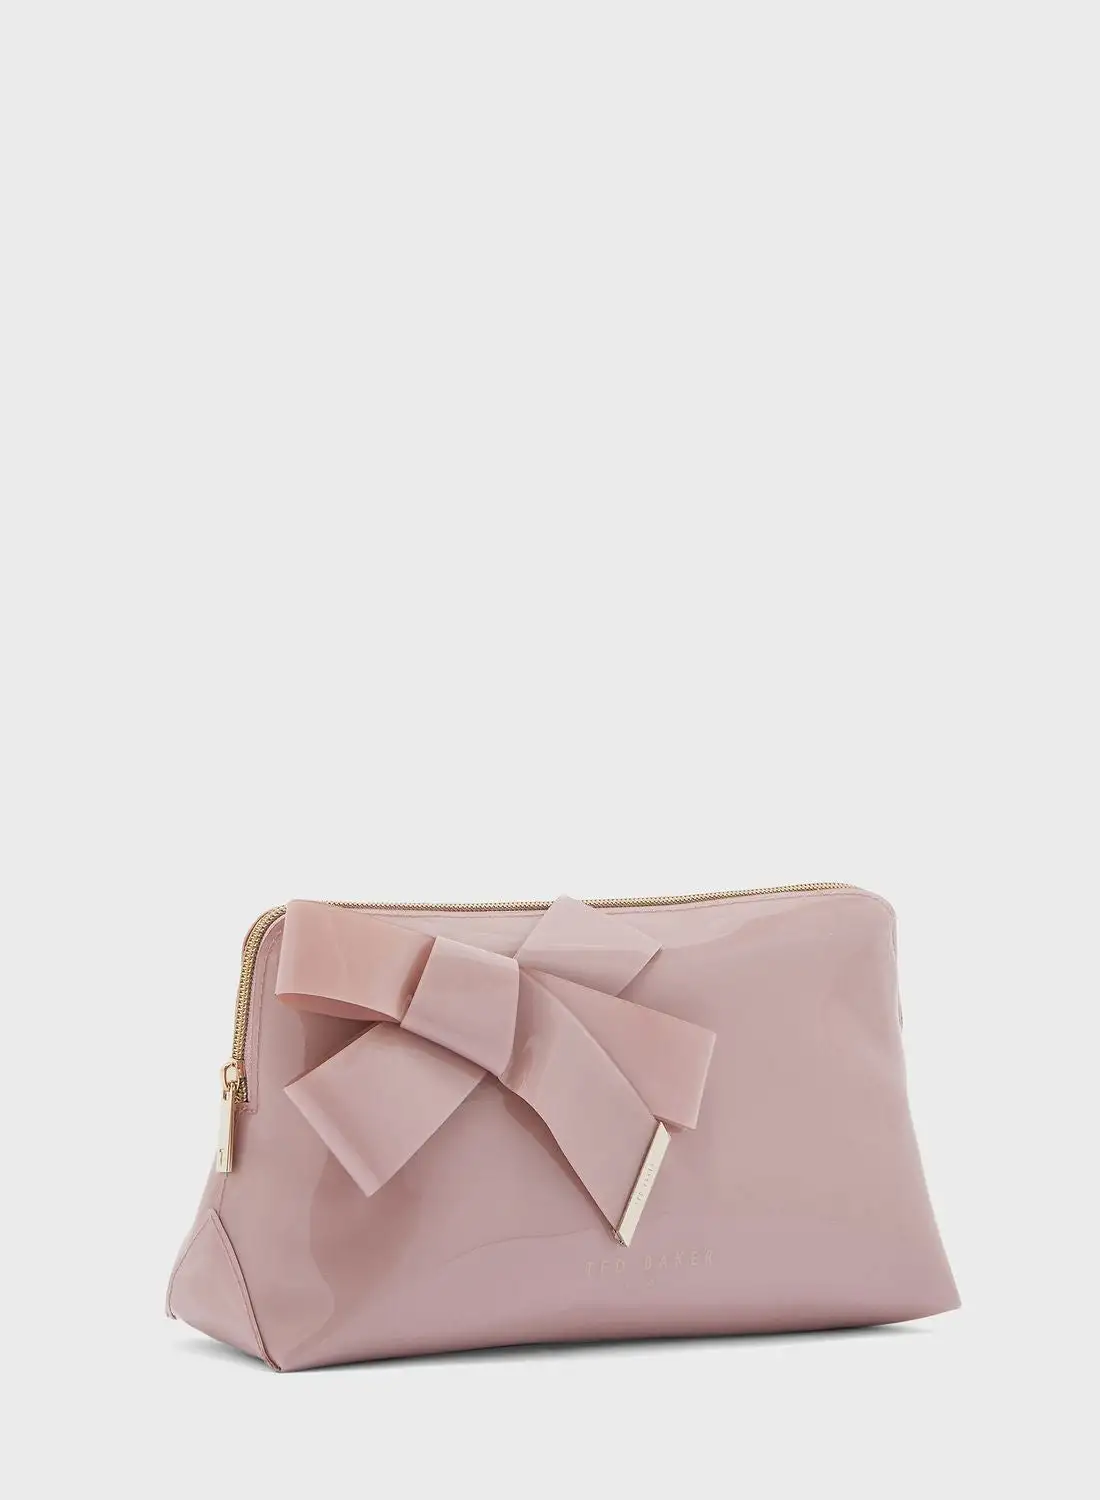 Ted Baker Nicco Knot Bow Cosmetic Bag